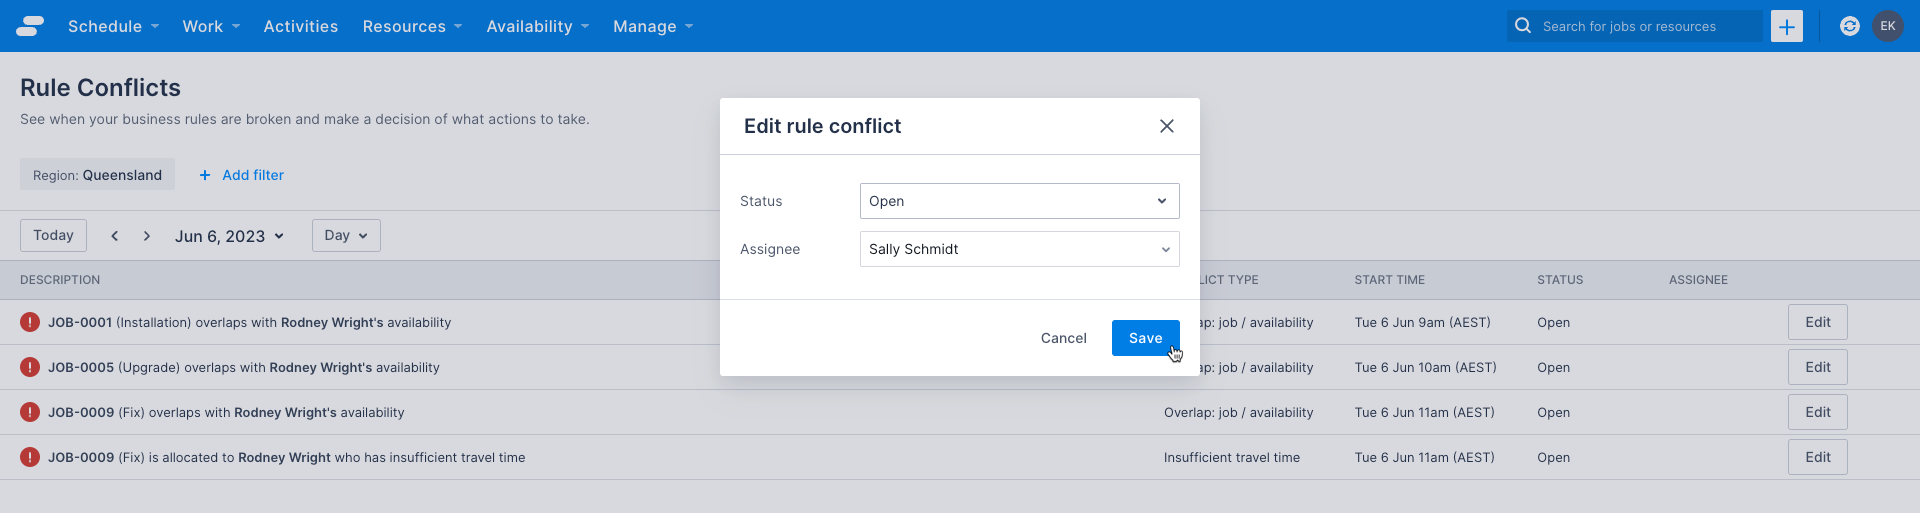 Screenshot of the Edit conflict options